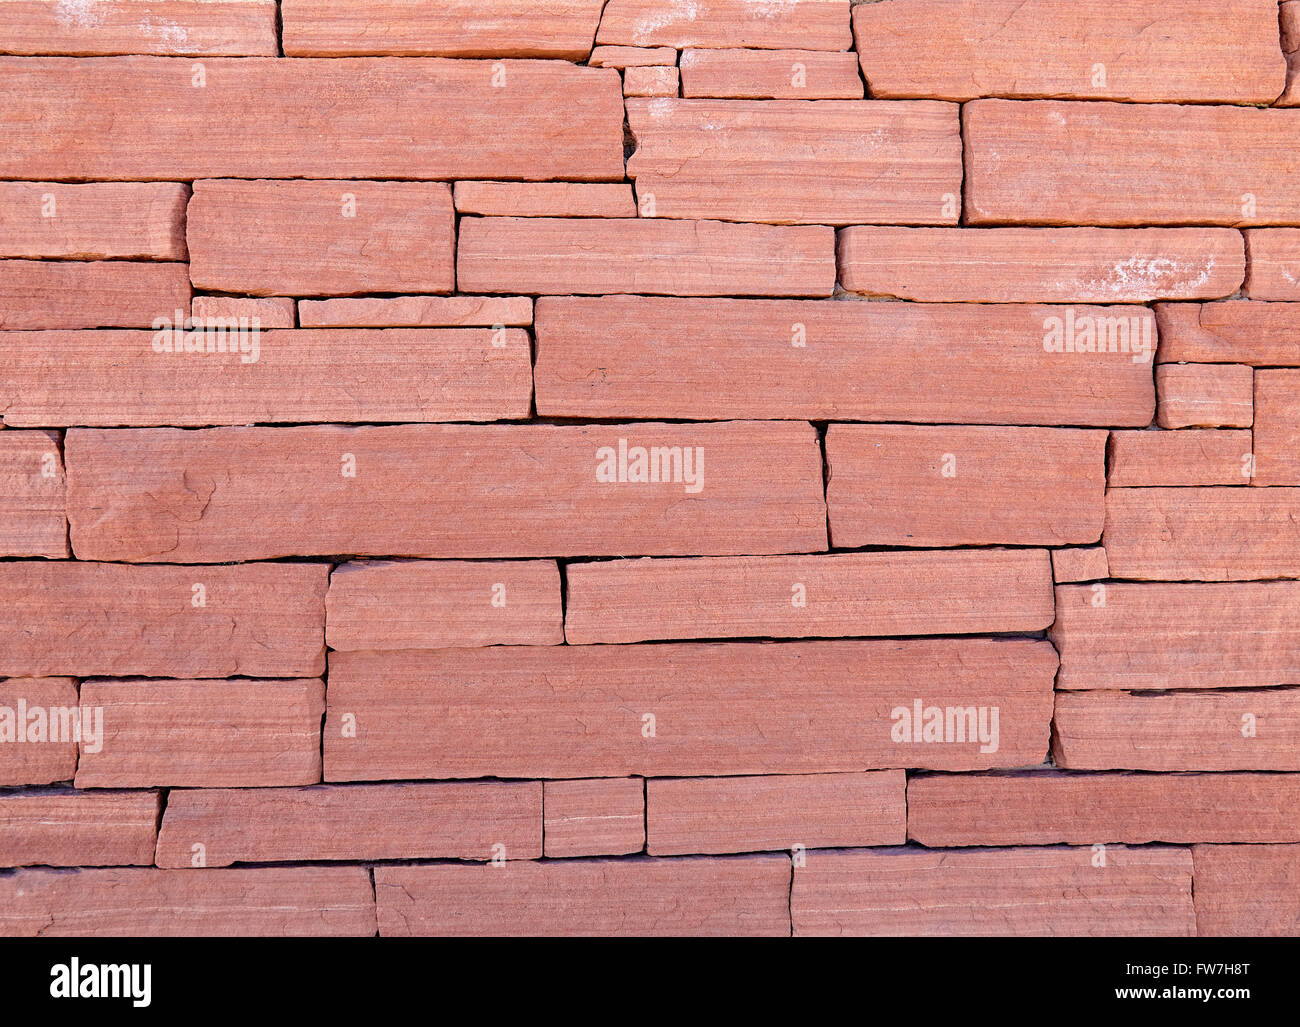 rock stone natural veneer wall sample detail closeup for building industry and home construction manufacturing Stock Photo